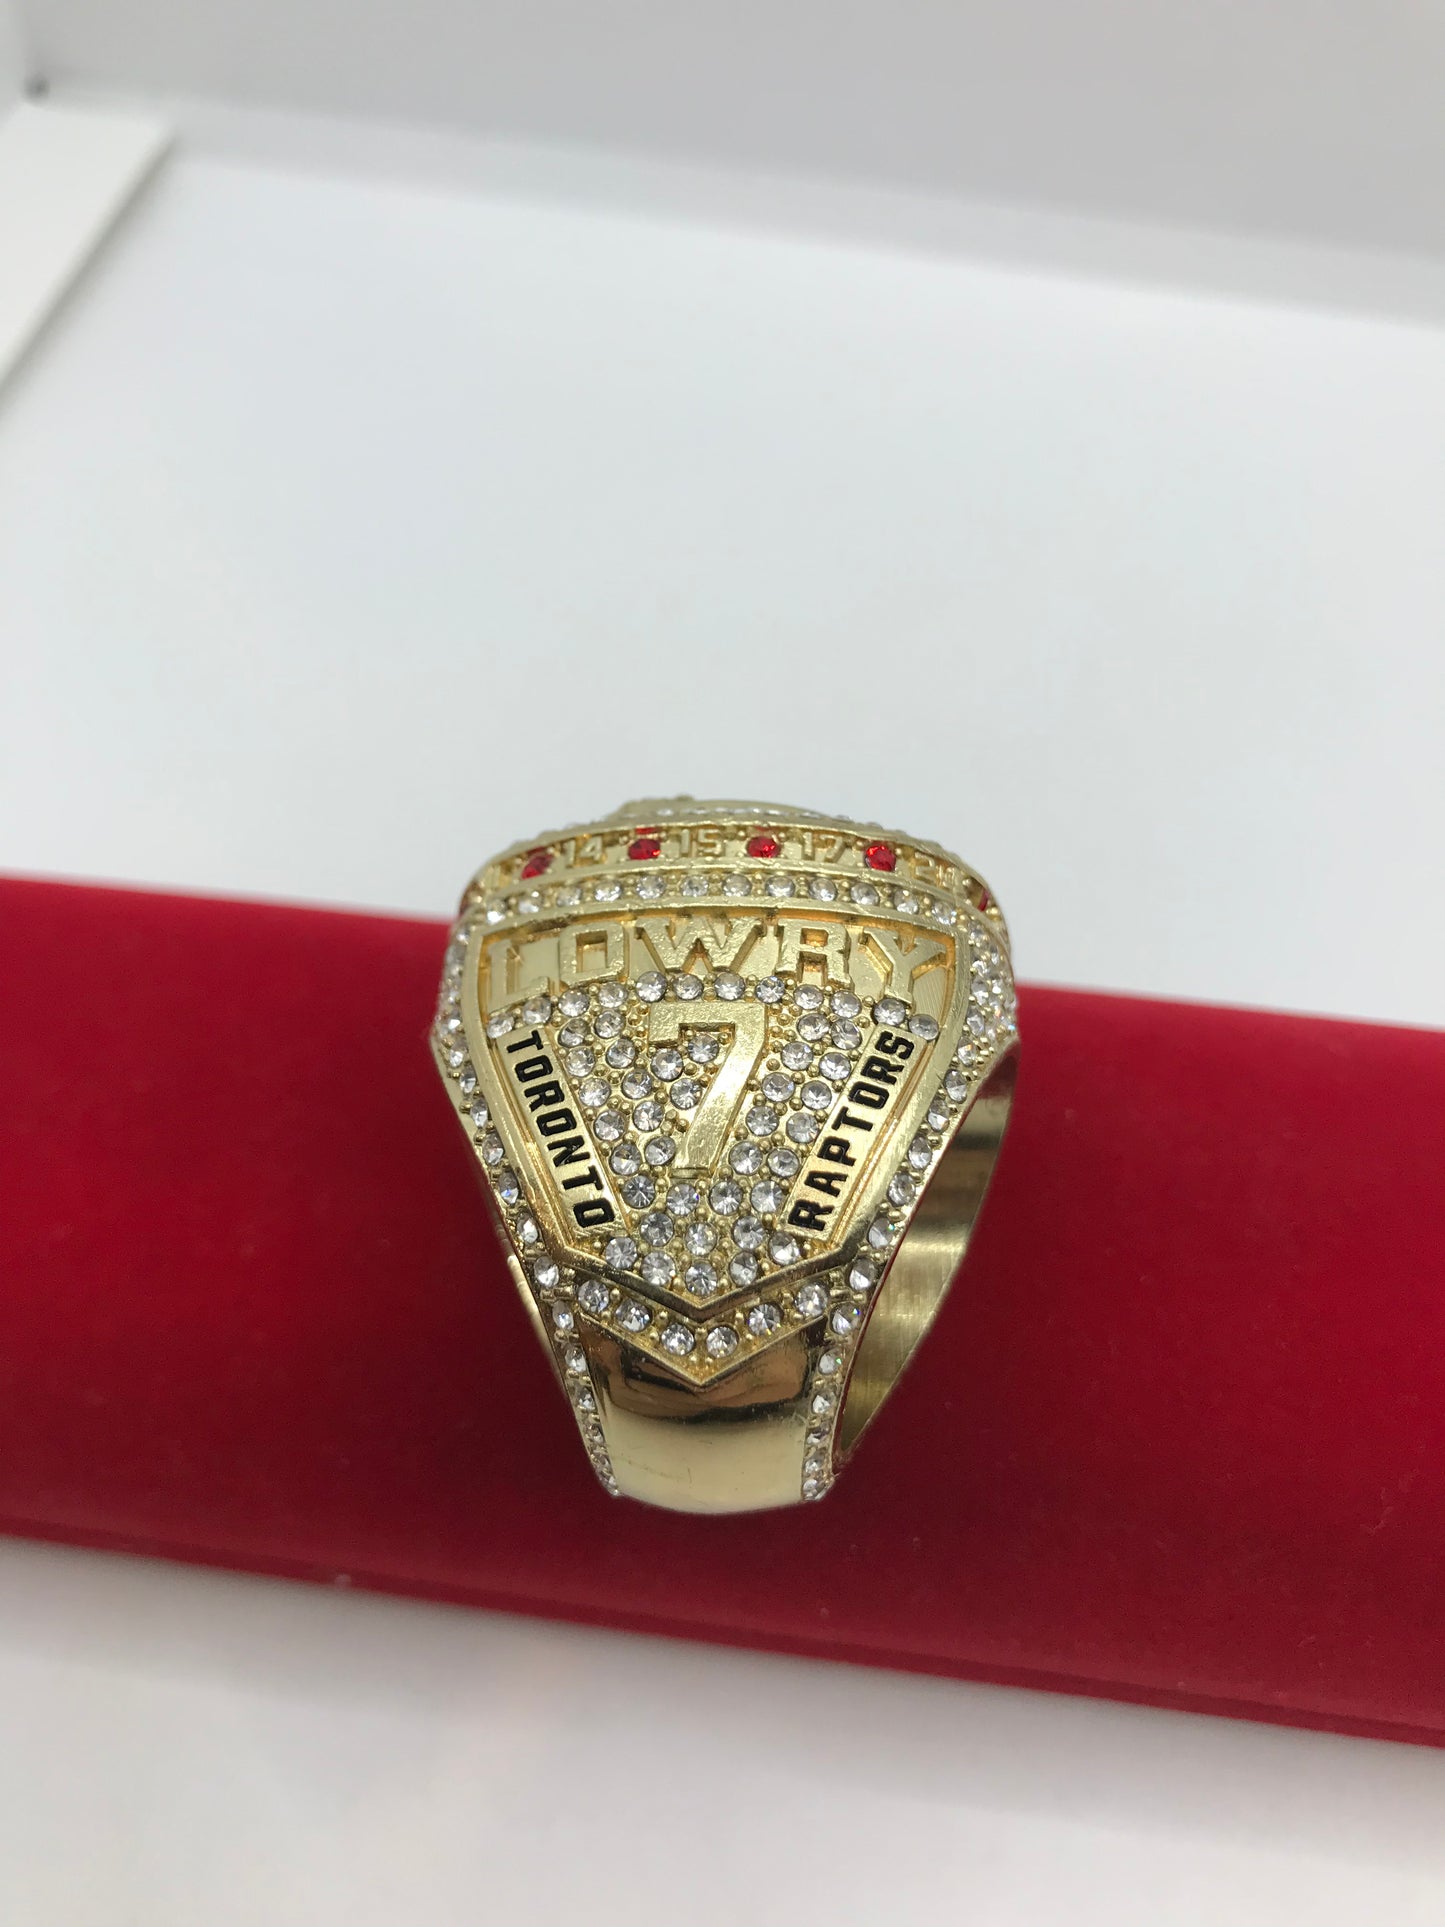 Add to your collecrion! The Championship Ring 💥Limited Quantity💥